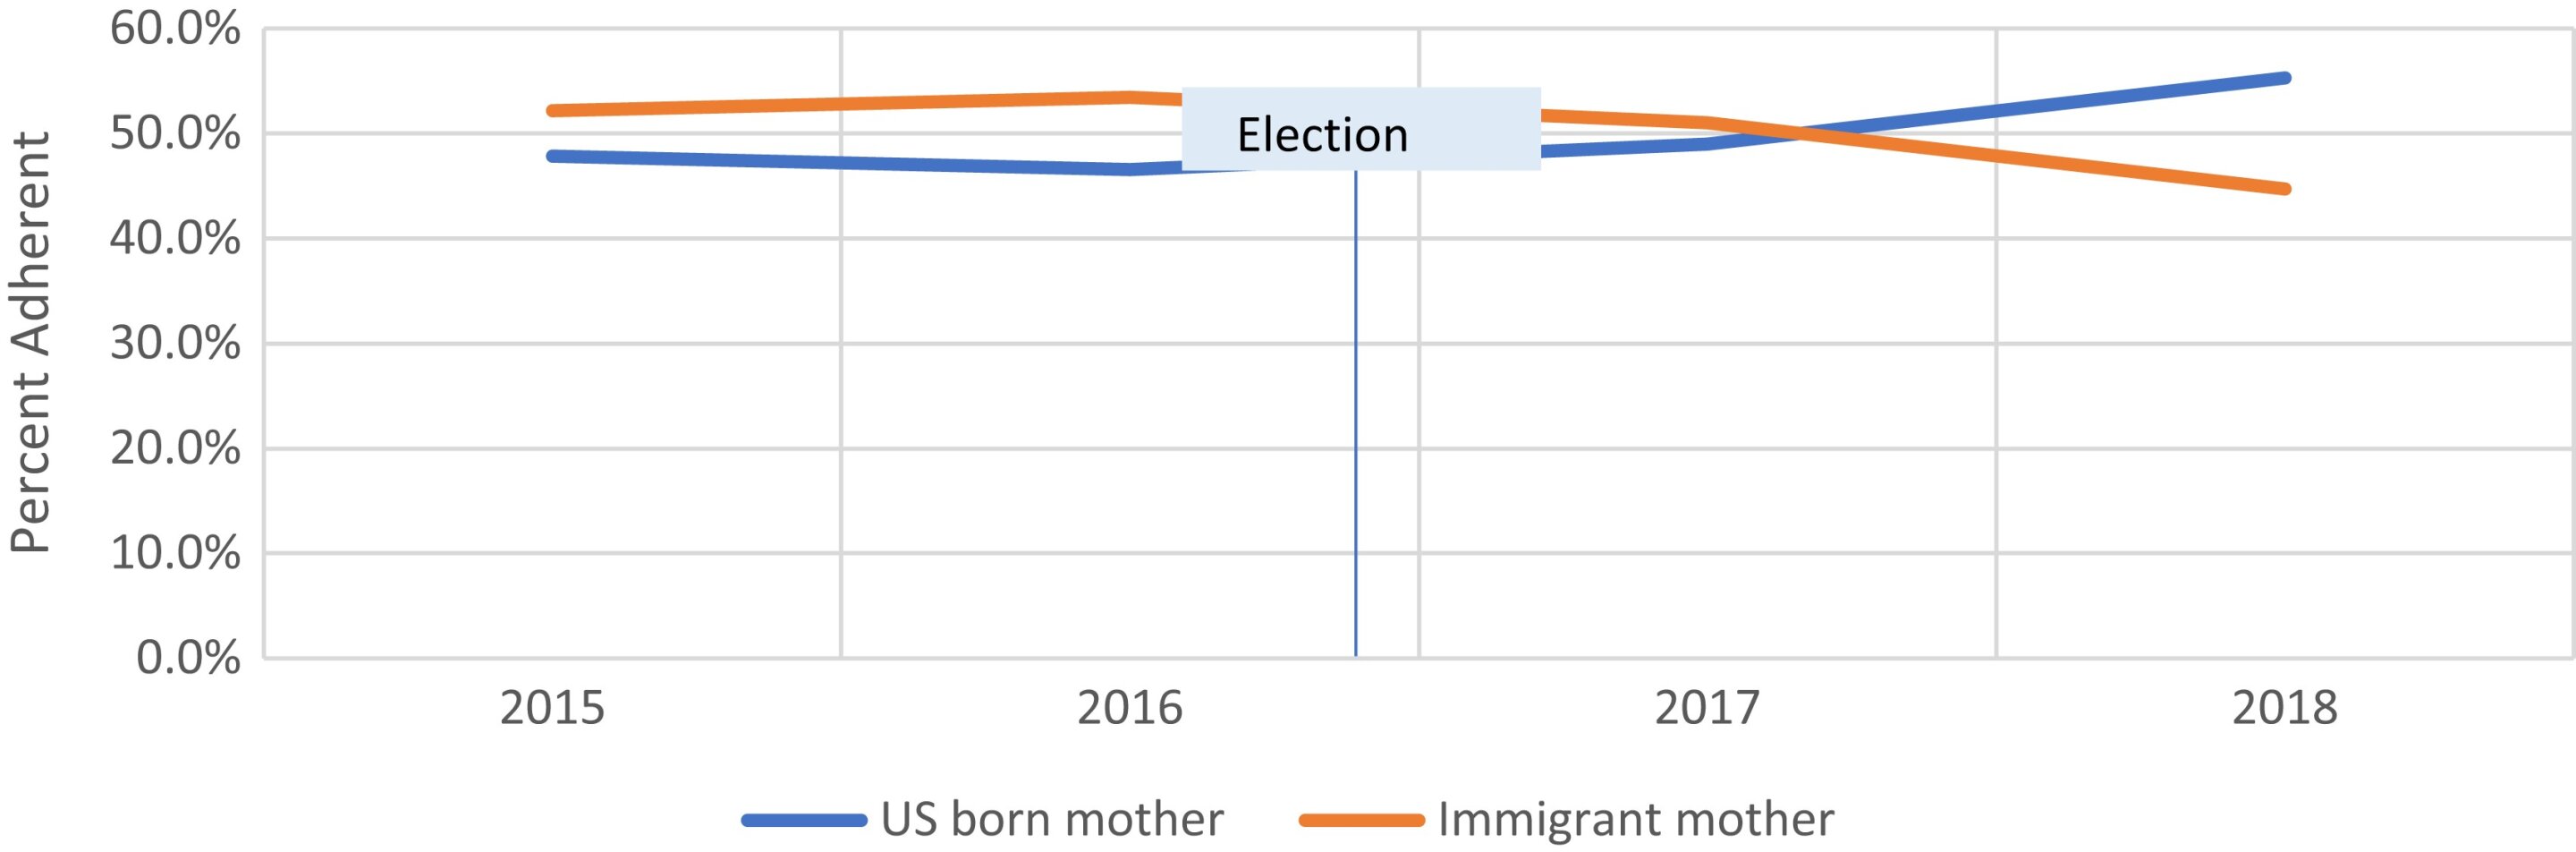 Study finds Trump’s election was associated with decrease in well-child visits for children of immigrant mothers